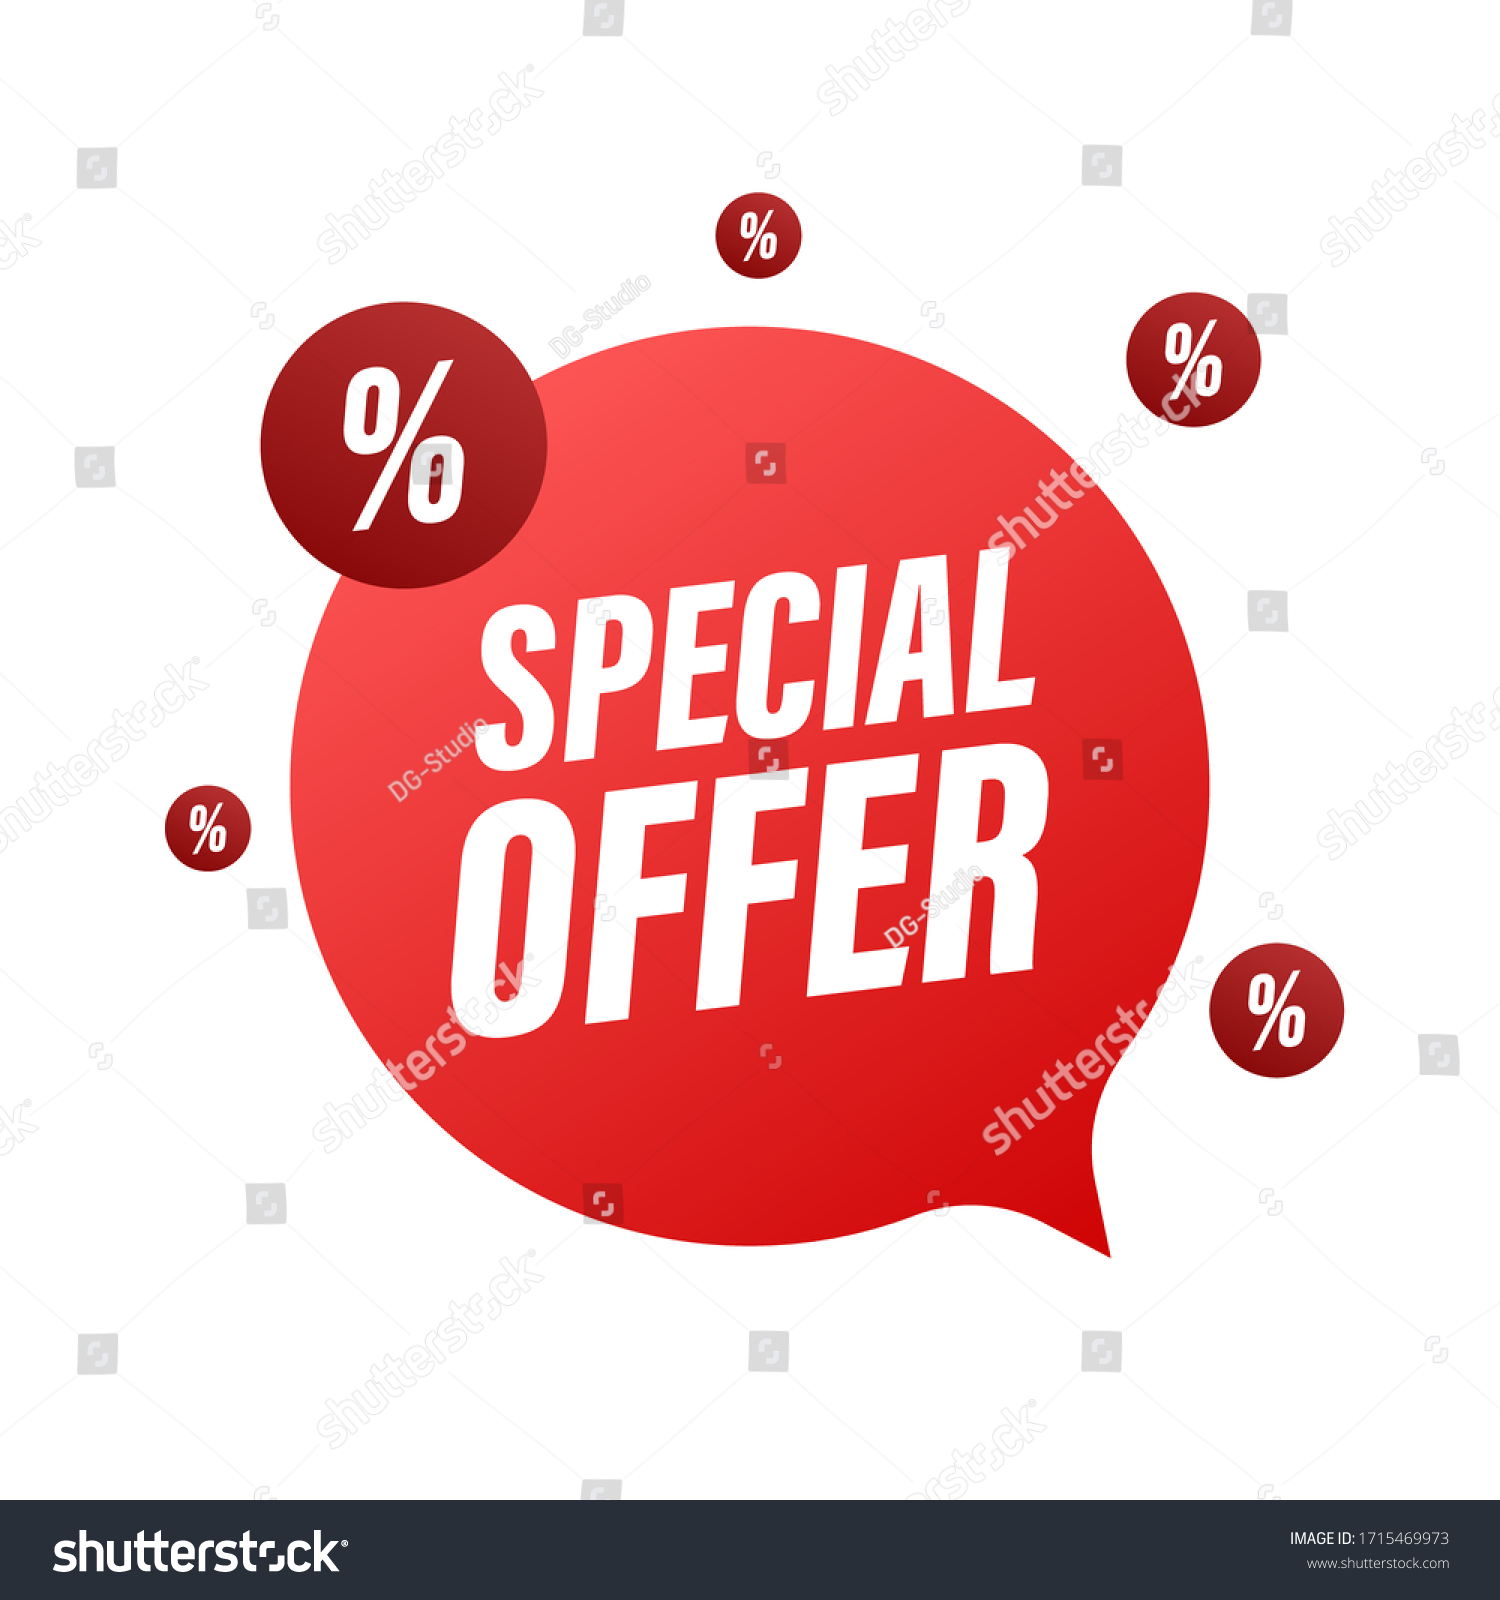 Special Offer grunge style red colored. Discount label. Vector stock illustration. #1715469973